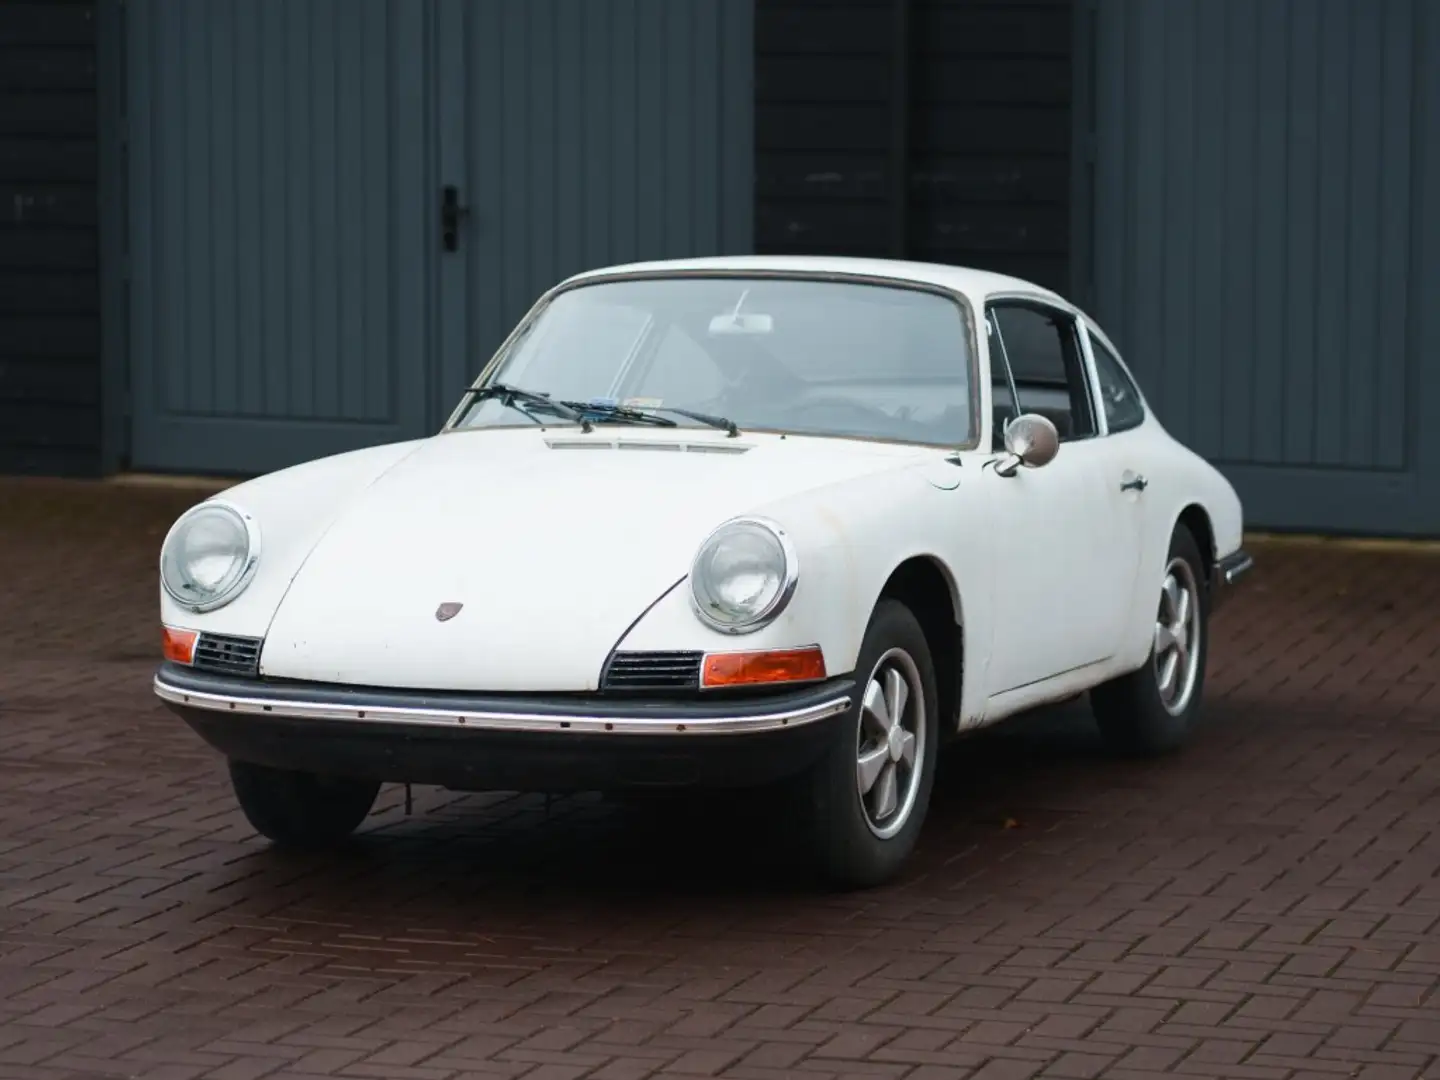 Porsche 912 Coupe late 1965 early 66 model Blanco - 1